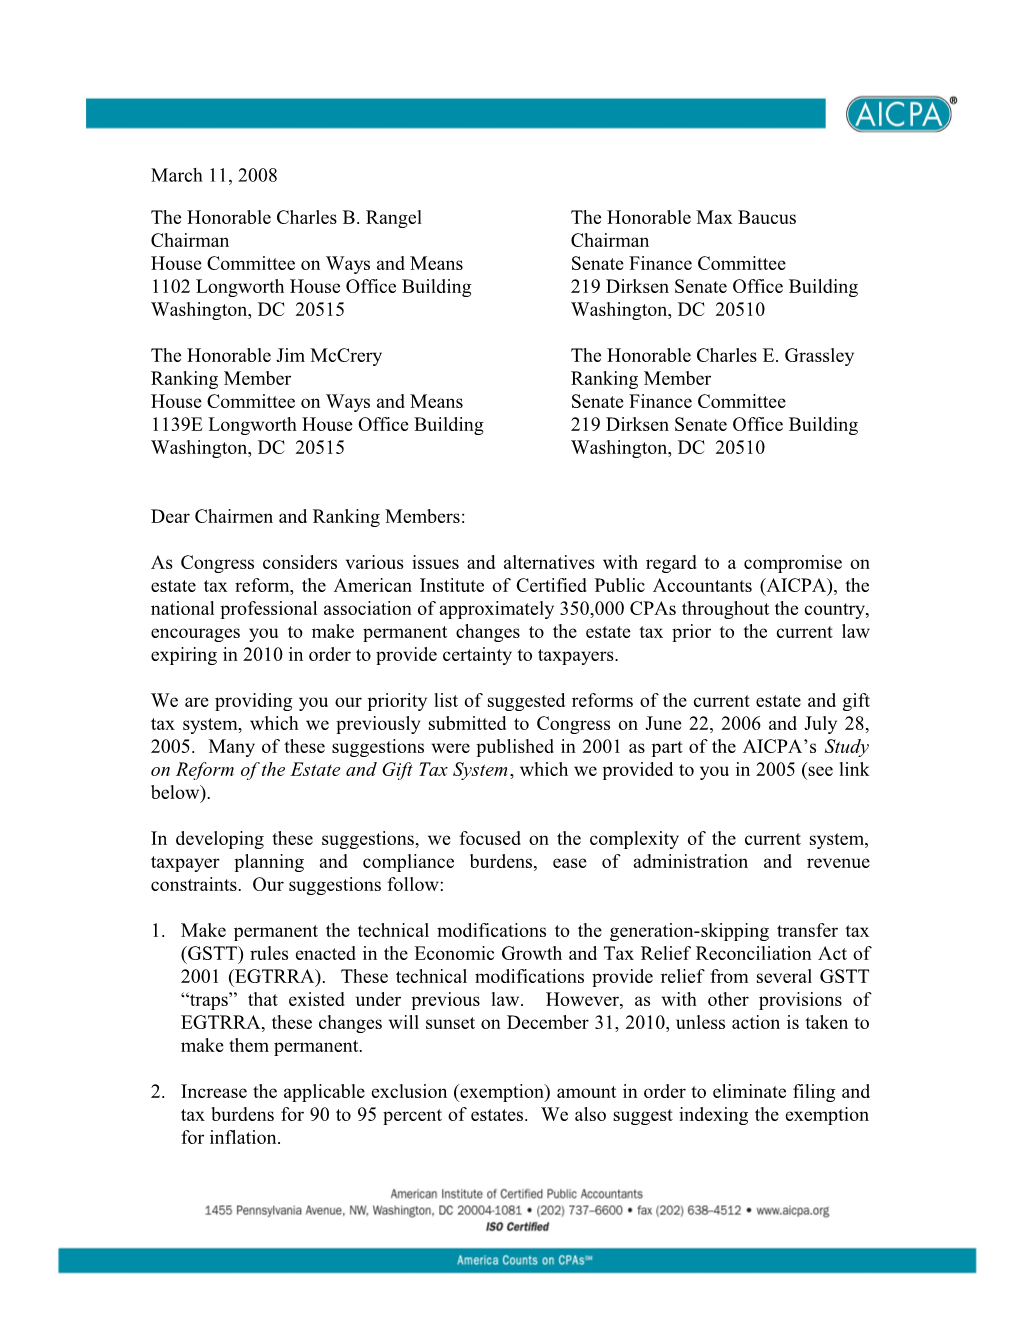 March 11, 2008 AICPA Letter to Congress on Estate Tax